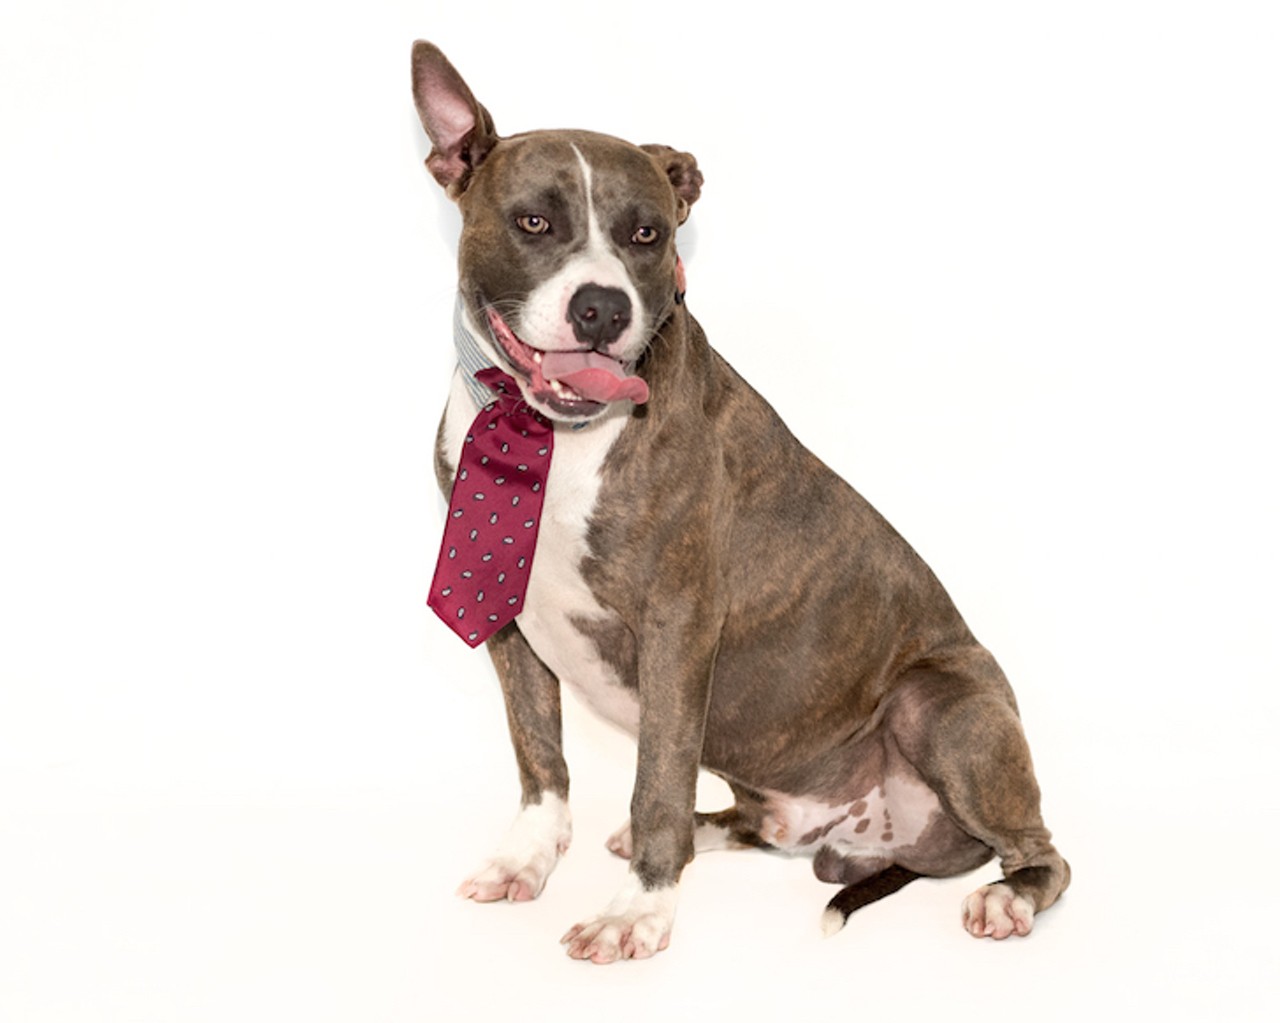 13 adoptable pups available right now at Orange County Animal Services